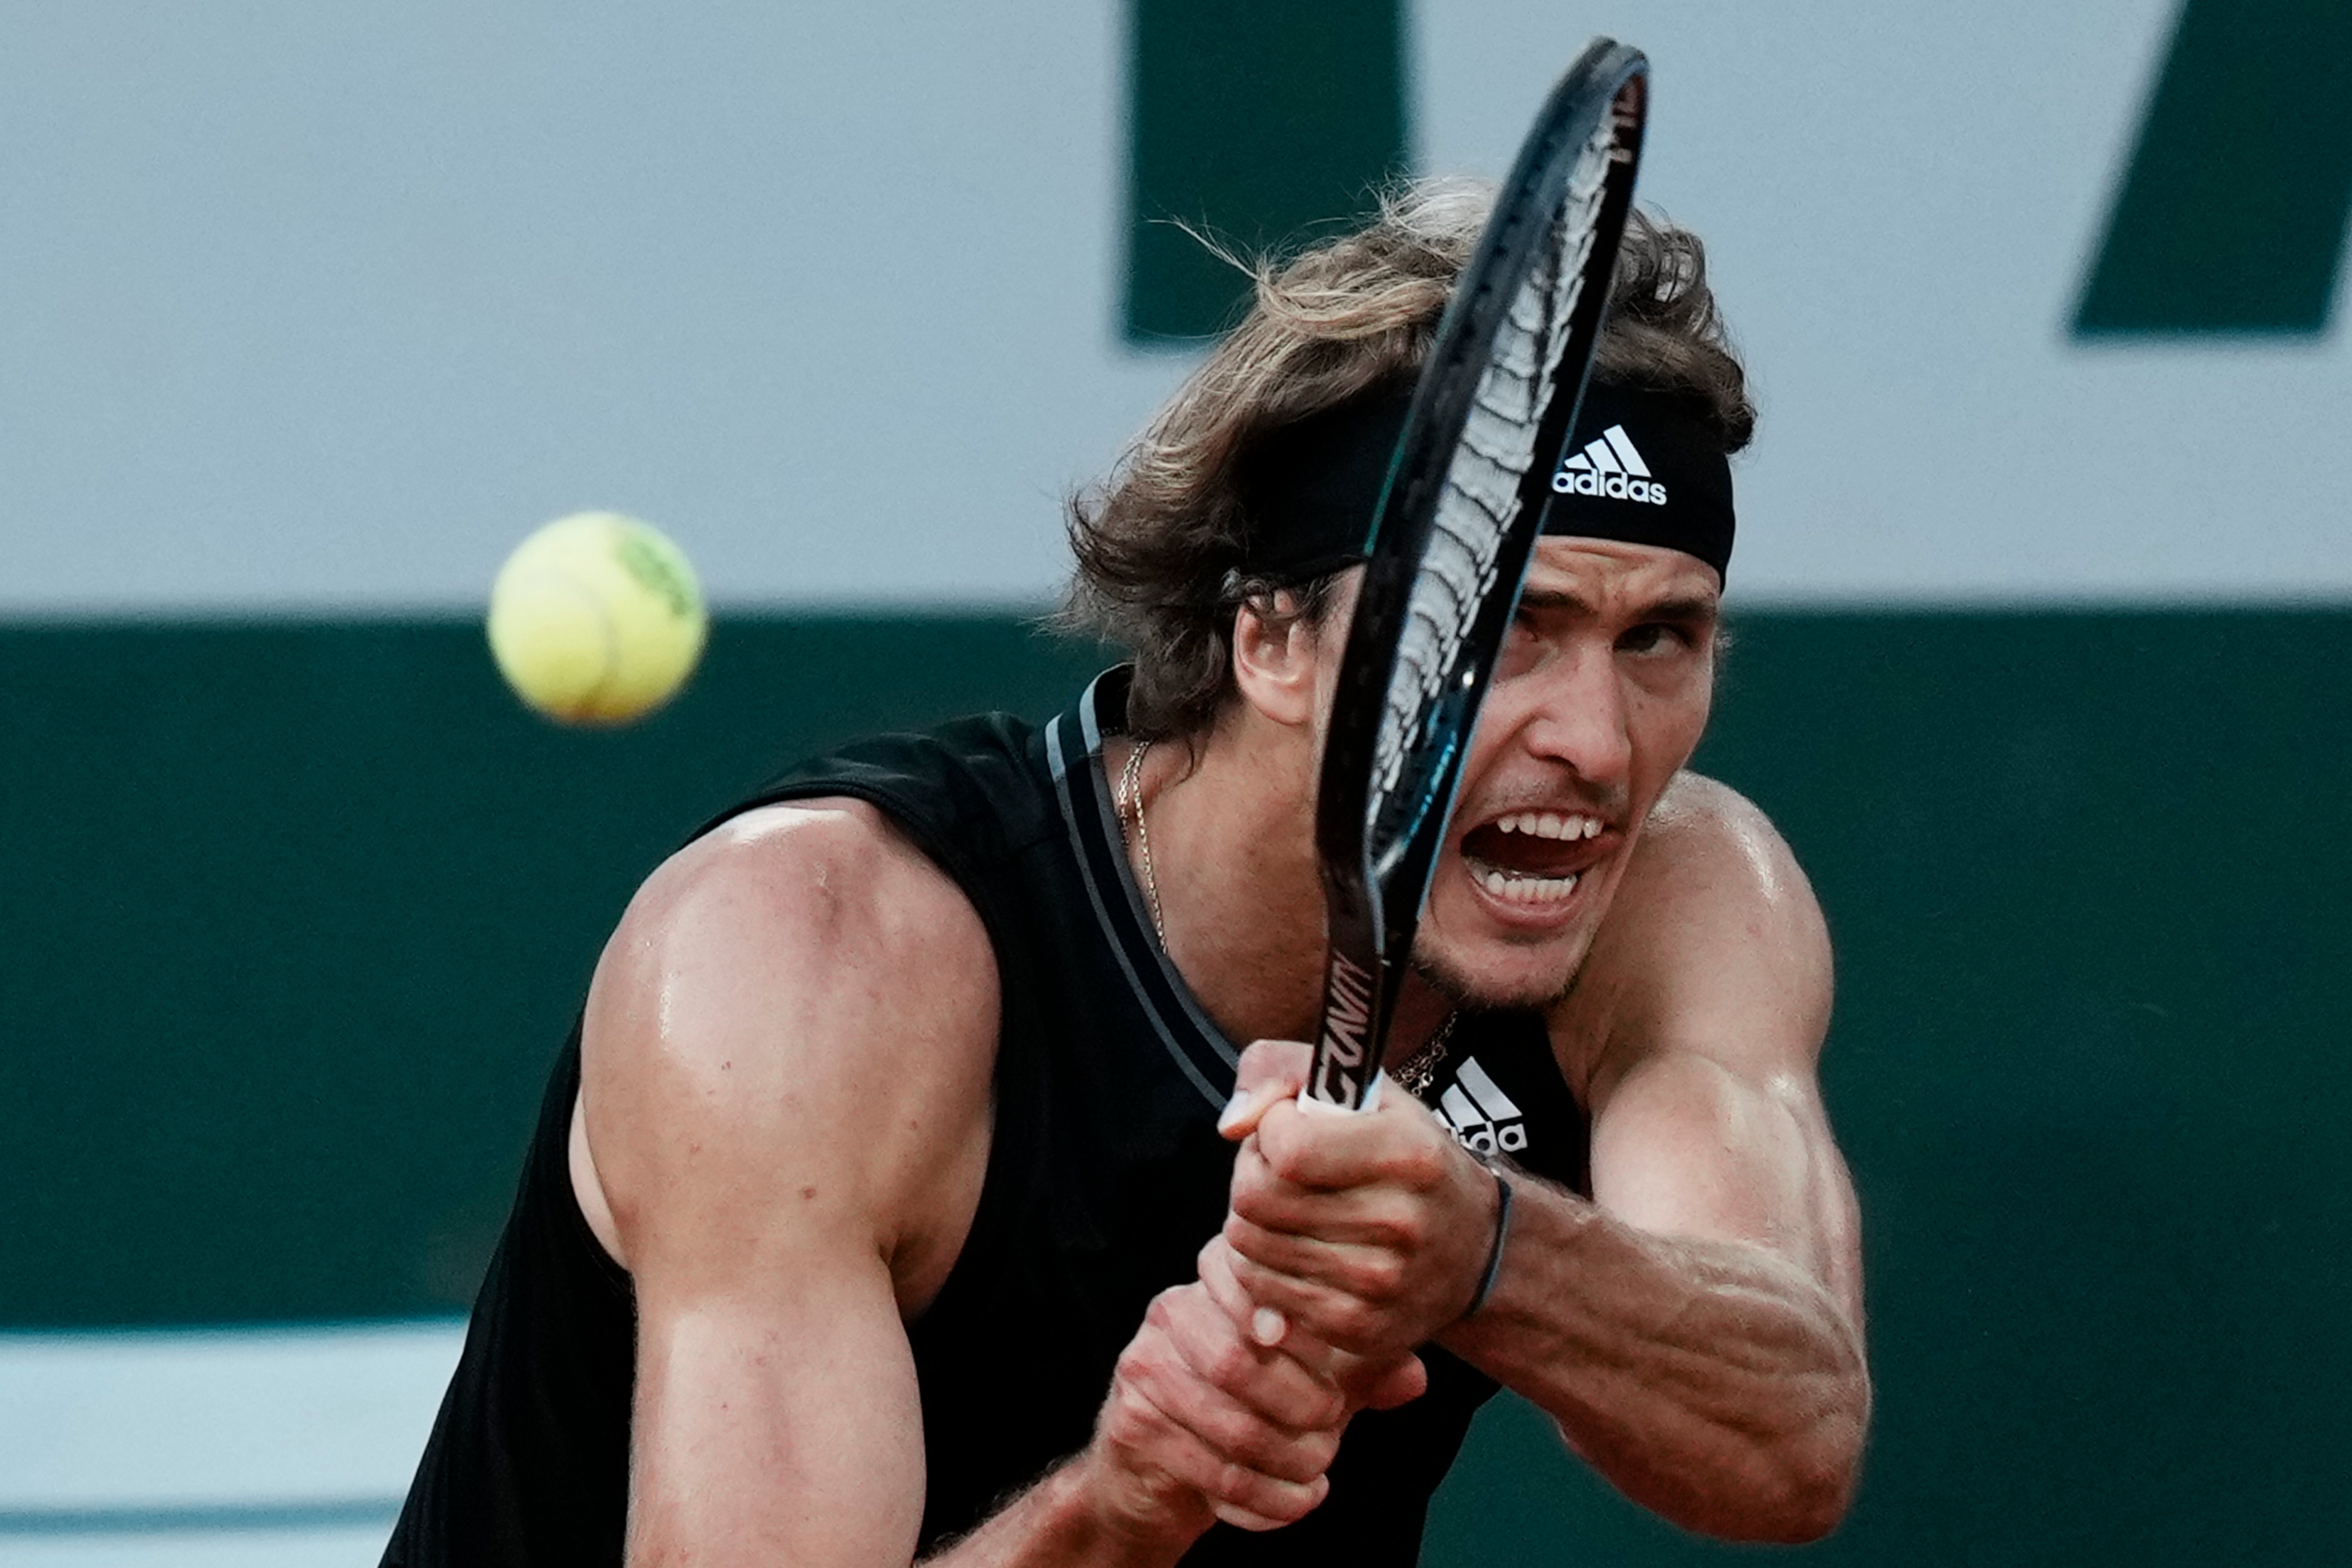 Germany’s Alexander Zverev in action at the French Open